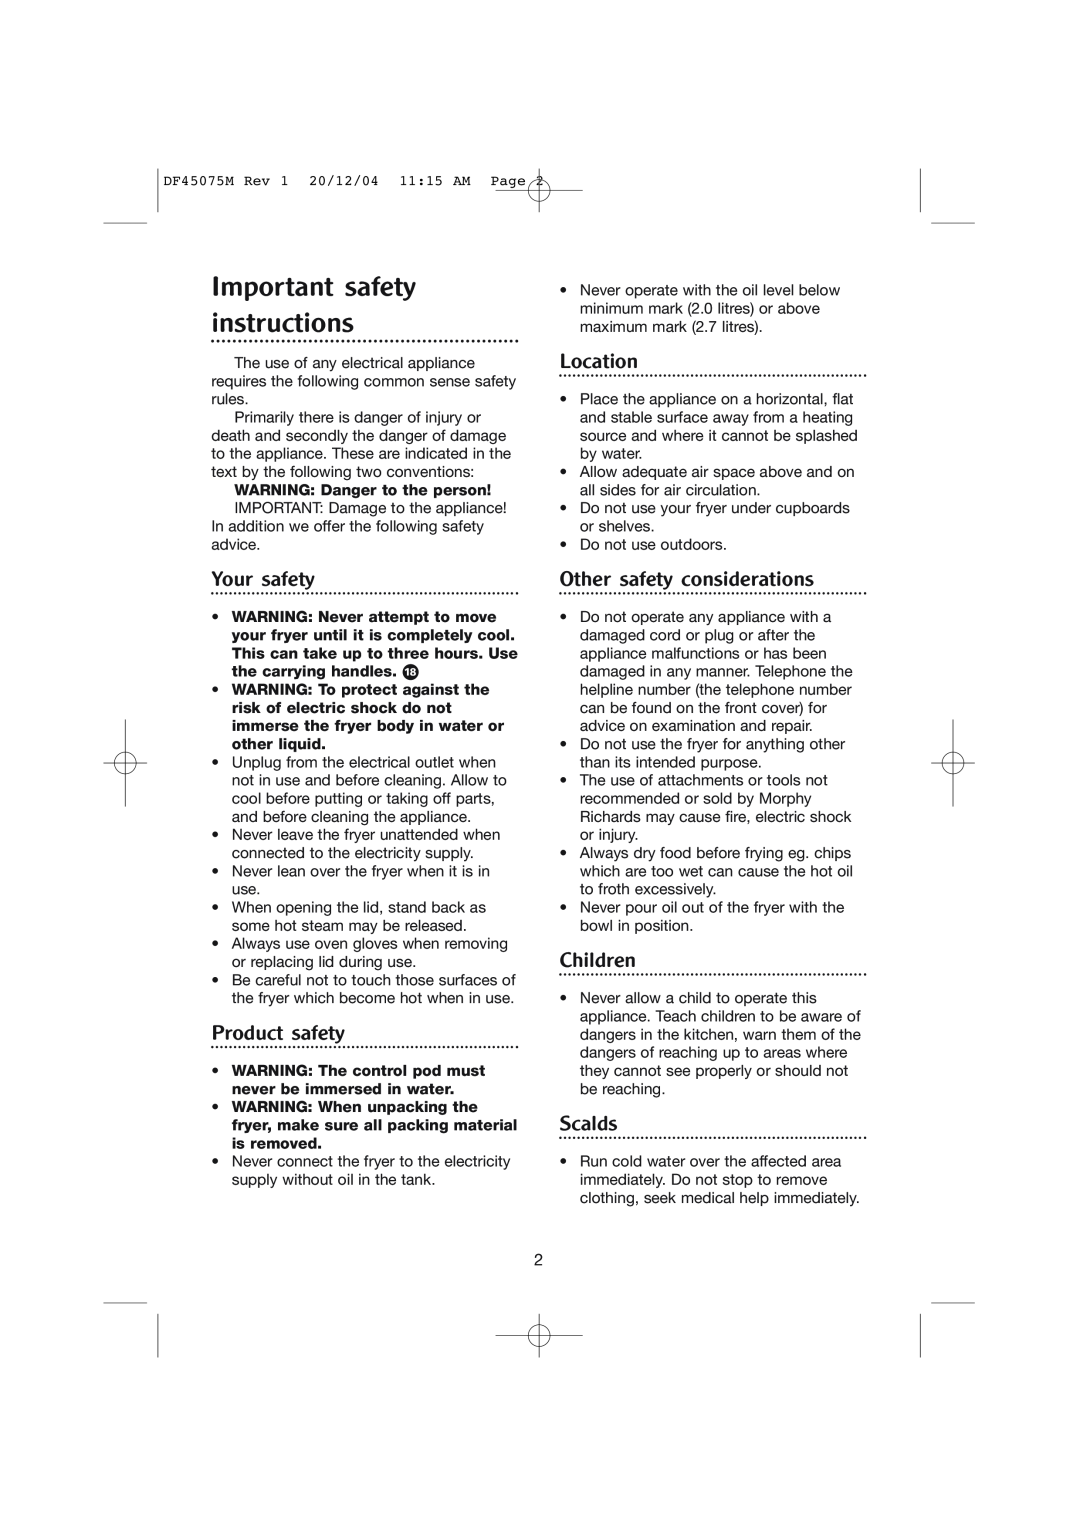 Morphy Richards DF45075M Important safety instructions, Your safety, Product safety, Location, Other safety considerations 